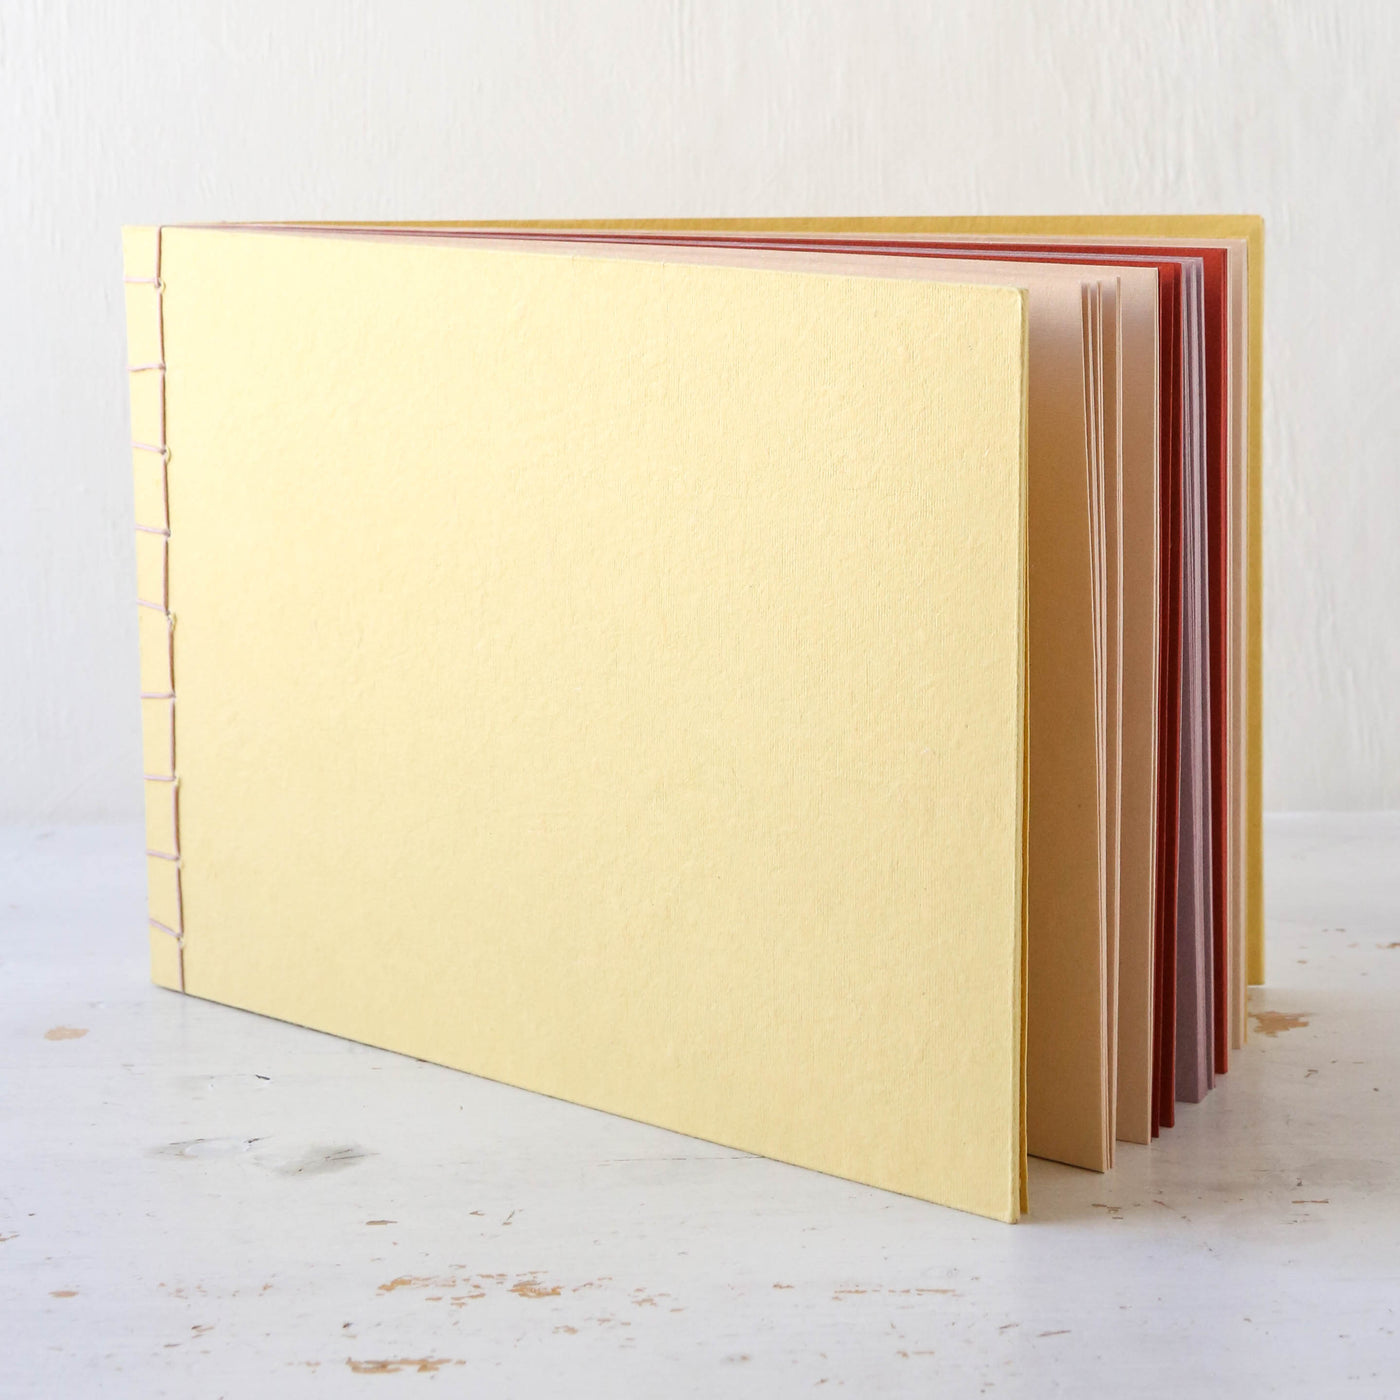 A4 'Iro' Recycled Paper Notebook